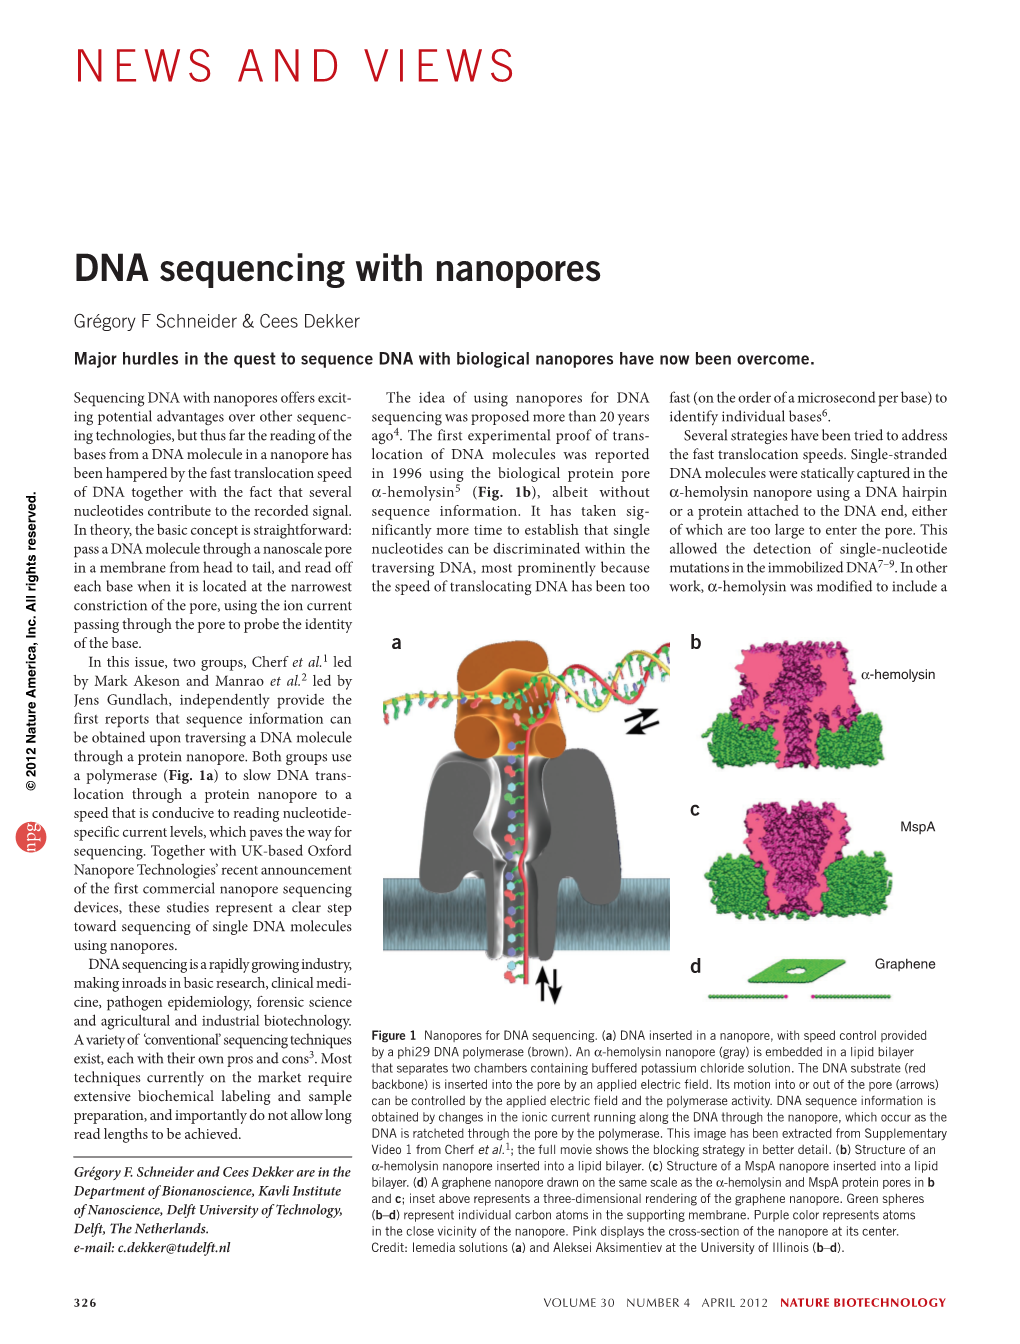 DNA Sequencing with Nanopores